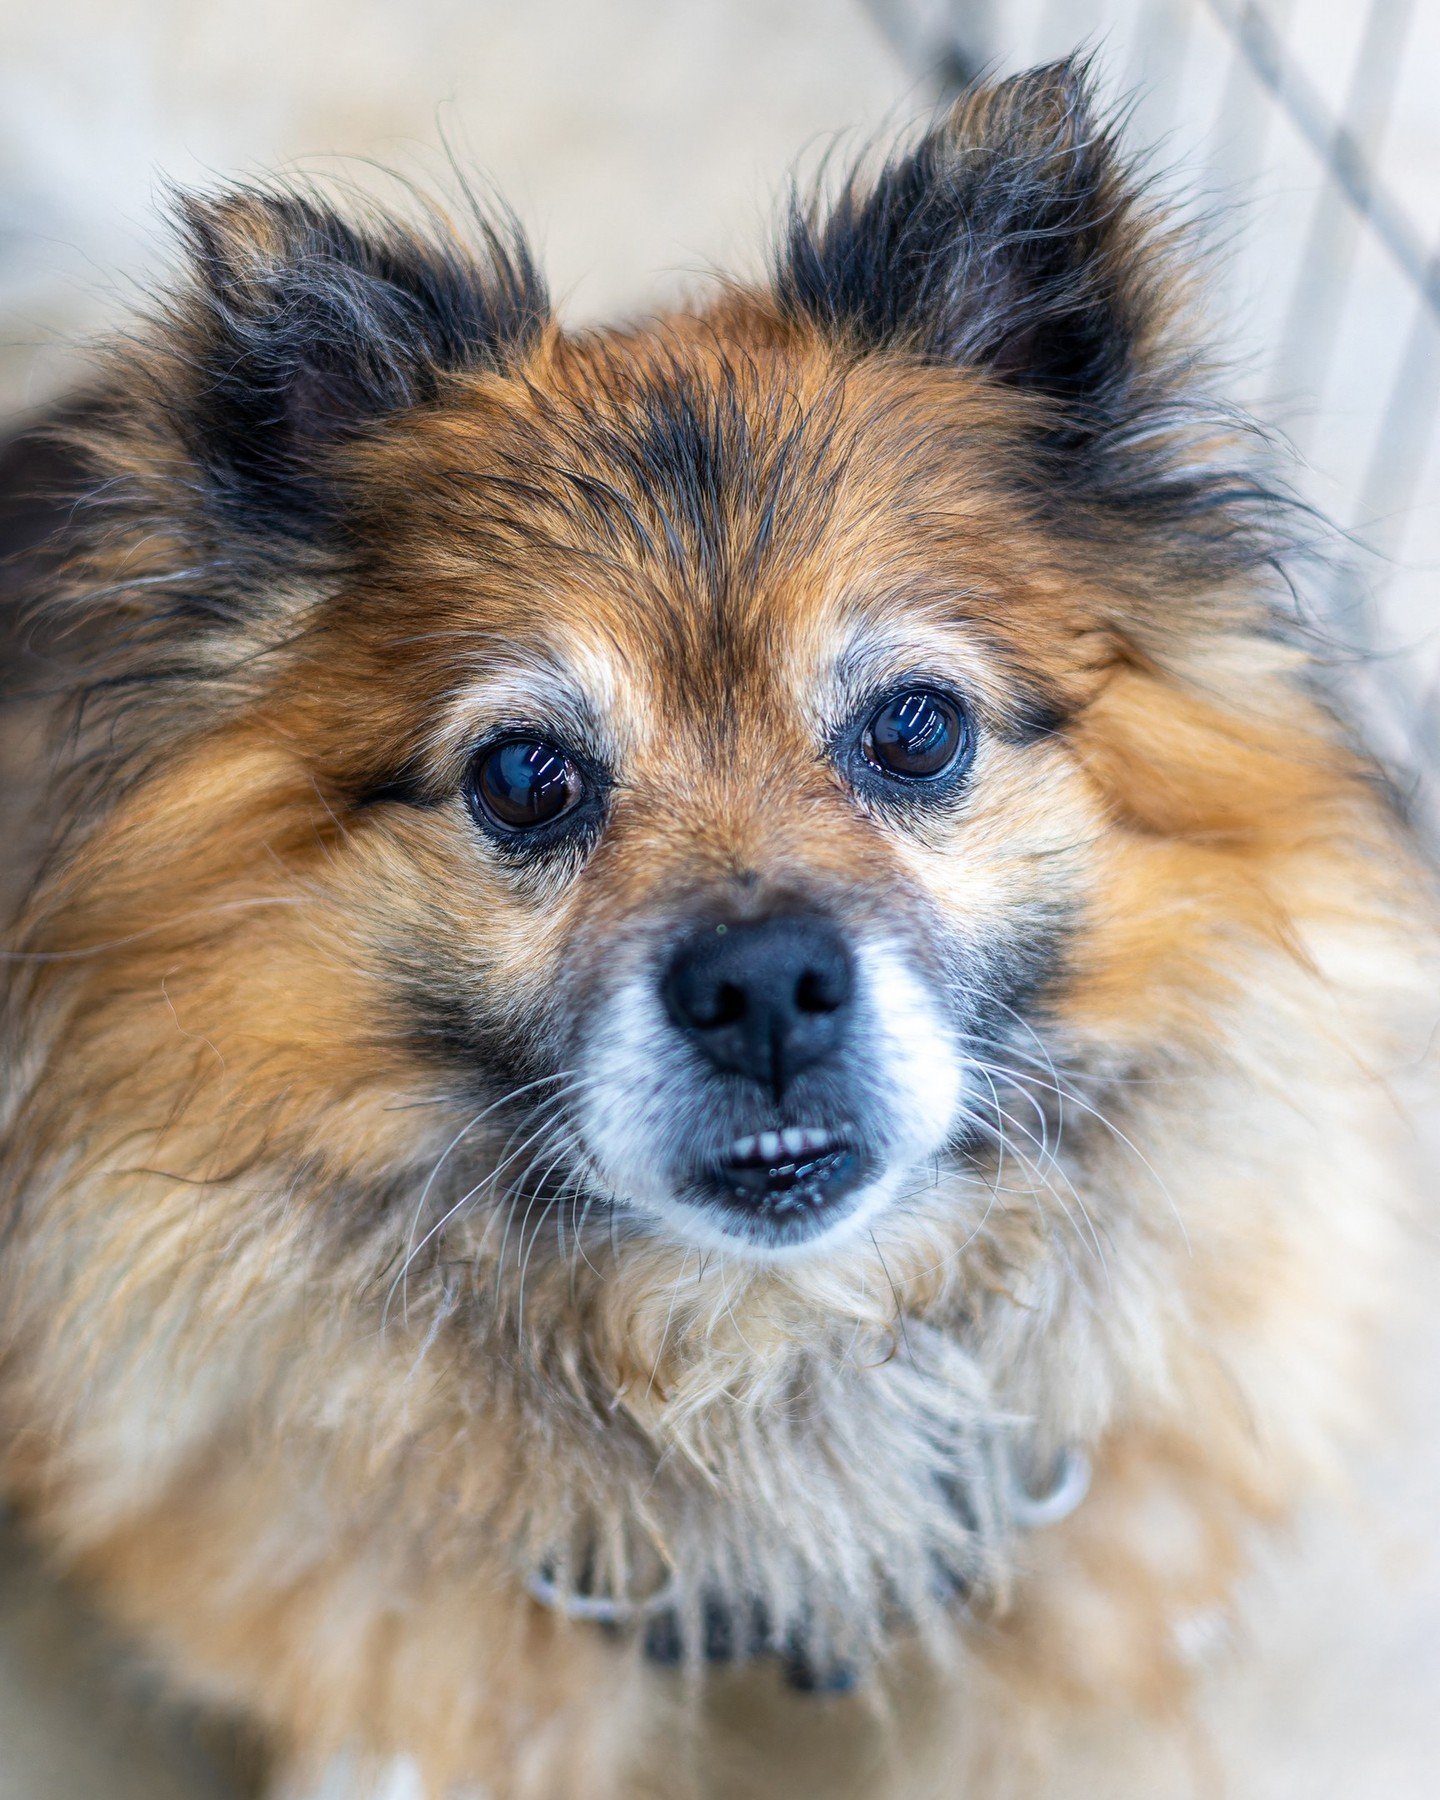 We welcomed Benny Andersson from @multcopets in late February; as a senior dog with kennel cough and a mysterious skin condition, we knew the shelter was no place for him to recover. ⁠
⁠
Since joining our crew, Benny's received all of the medical car